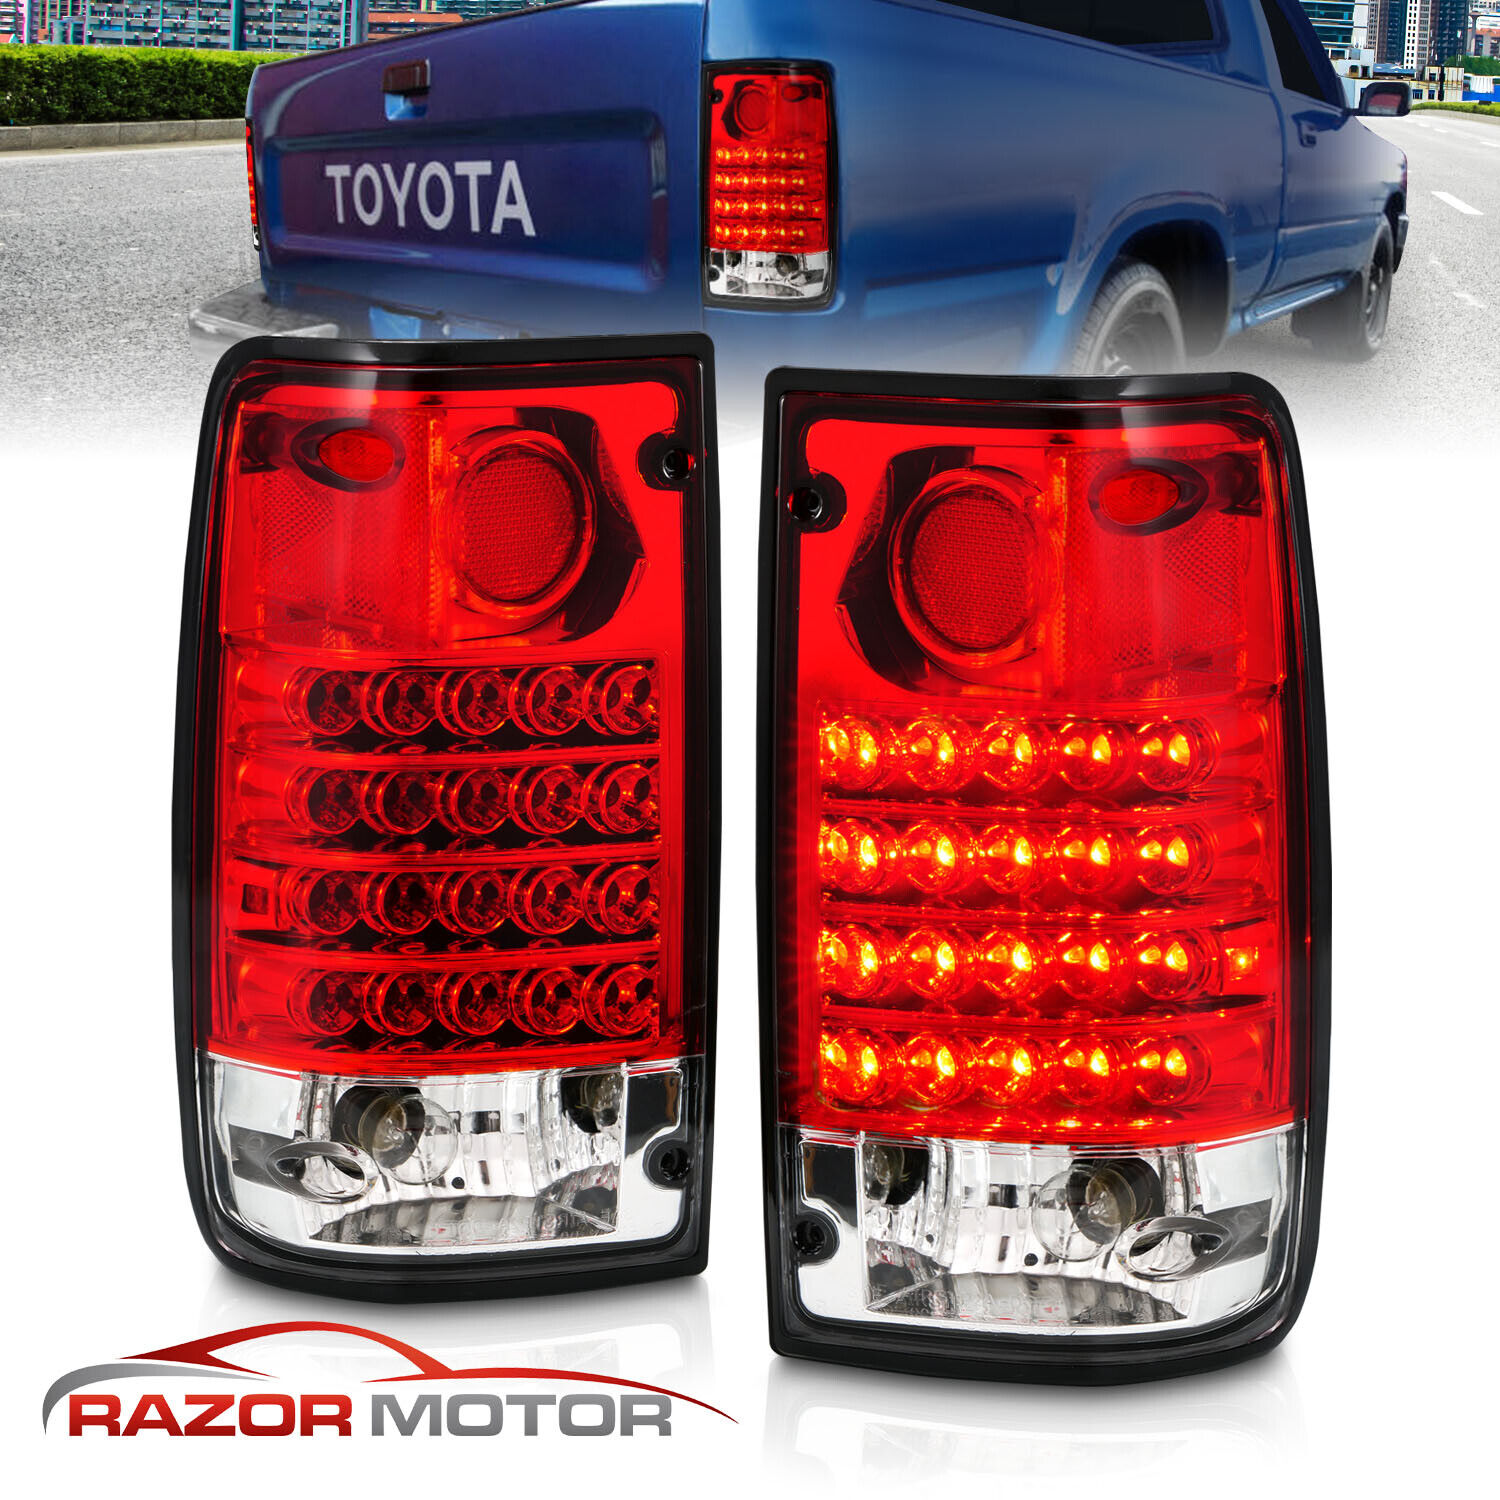 1989-1995 Red Clear LED Tail Light Pair For Toyota Pickup Truck w/ Bulb + Socket